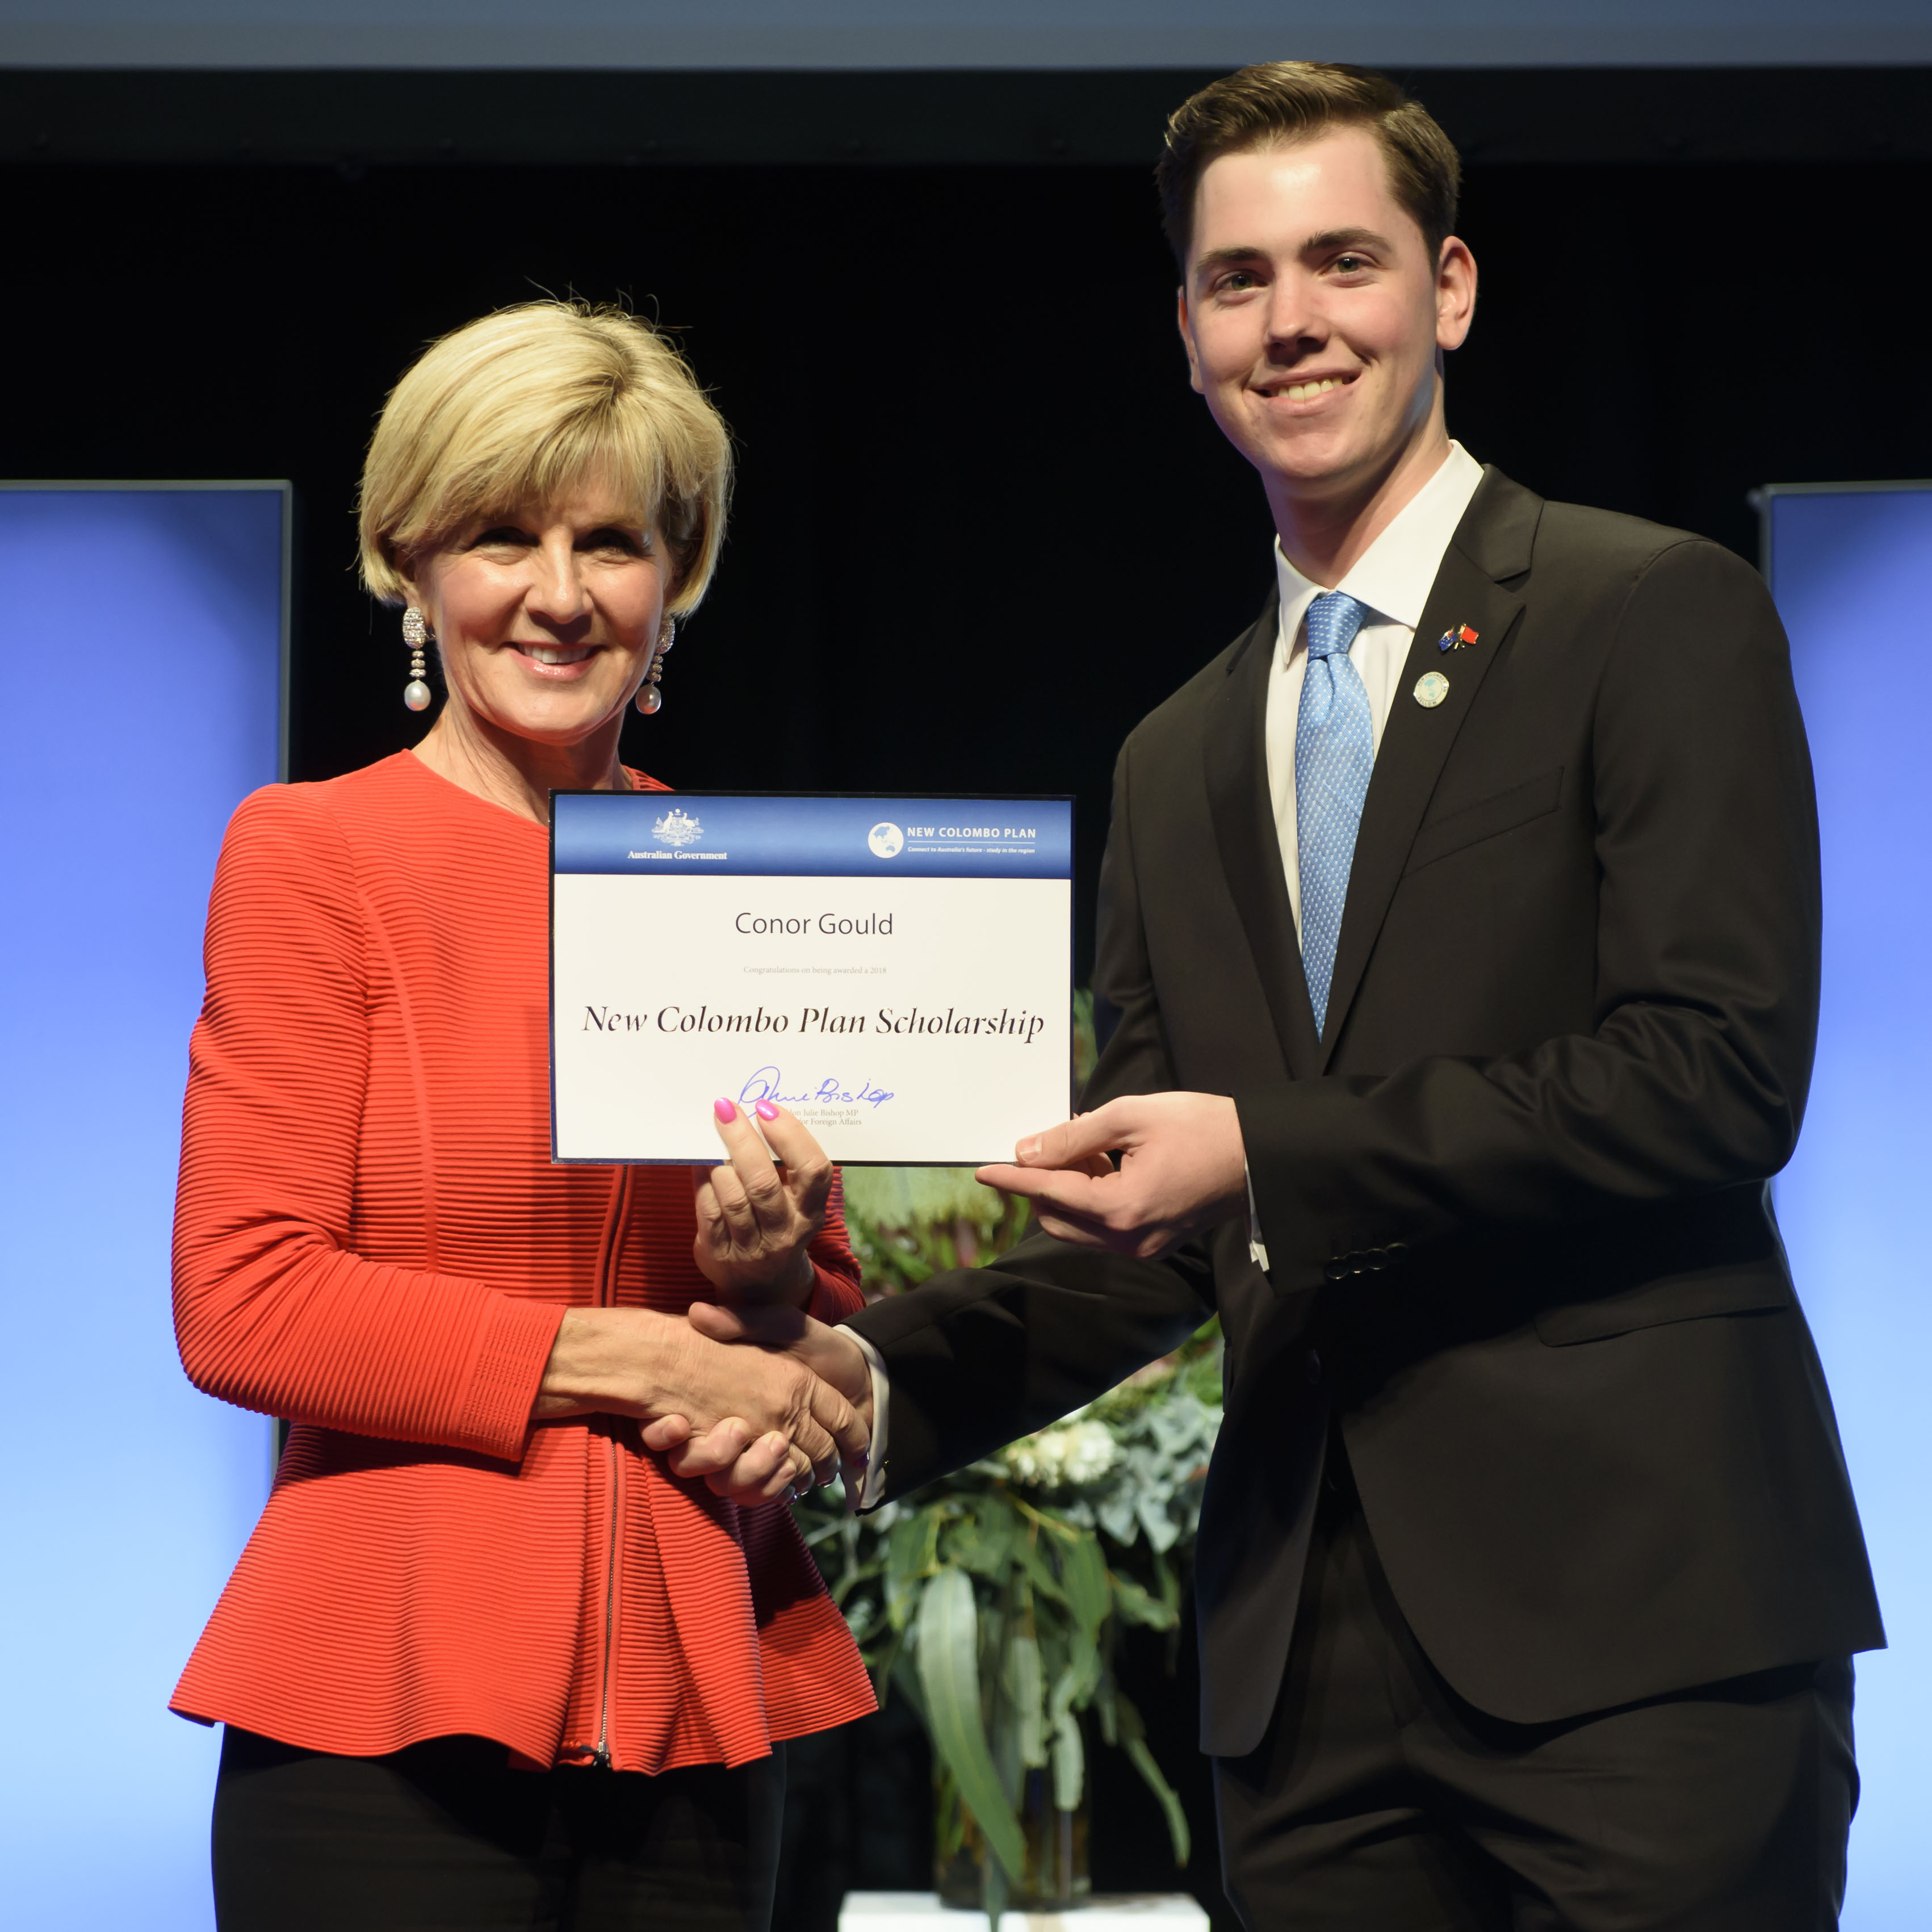 Conor Gould, pictured receiving the 2018 New Colombo Plan China Fellow Award from Foreign Minister Julie Bishop, is facing a new challenge in New Zealand this week.